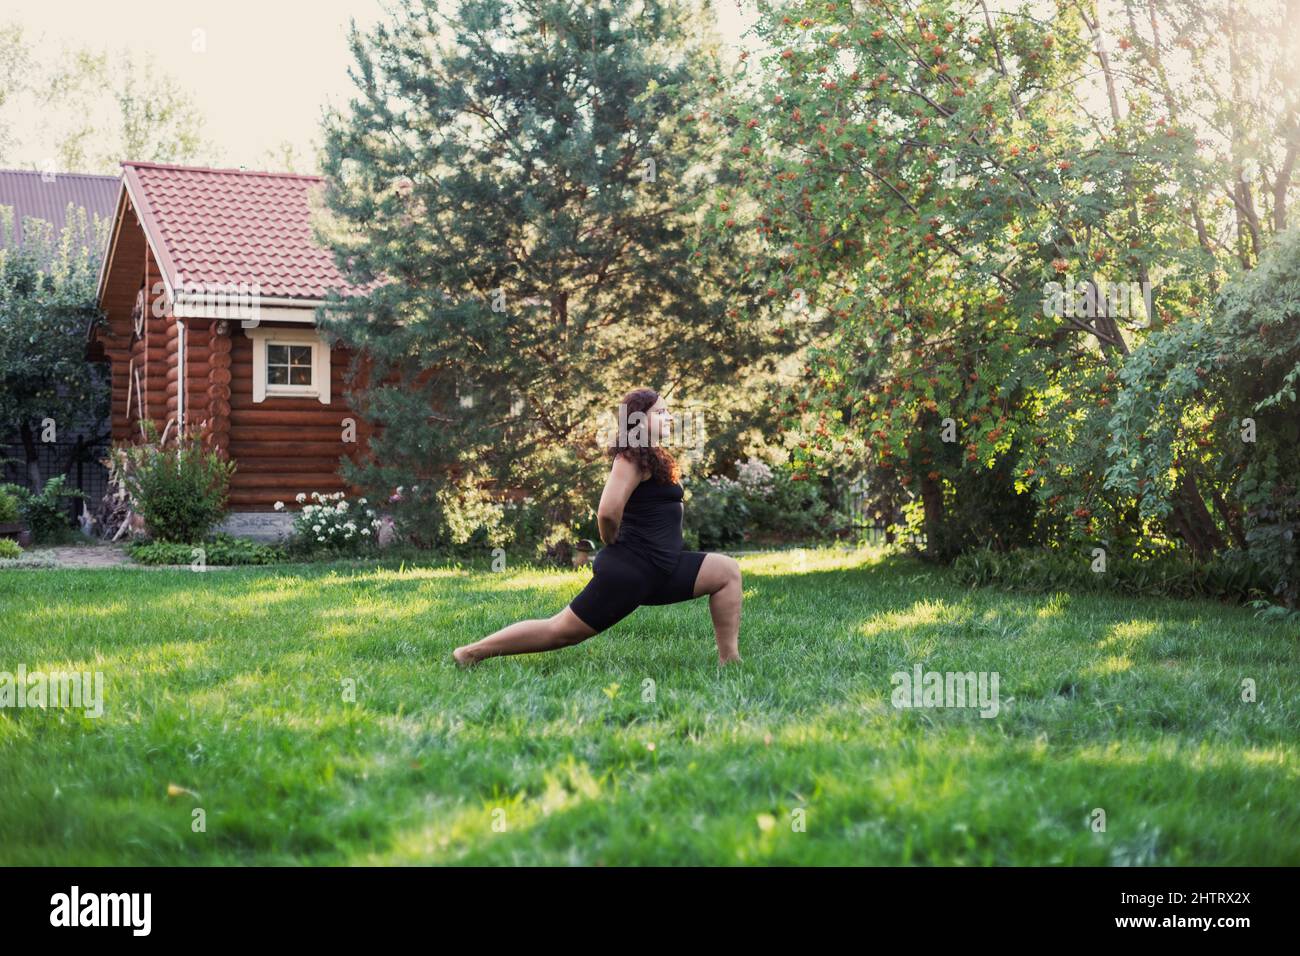 Blissful fat woman doing exercises for stretching legs green grass on backyard of cottage with wooden house and trees in background. Body positivity Stock Photo